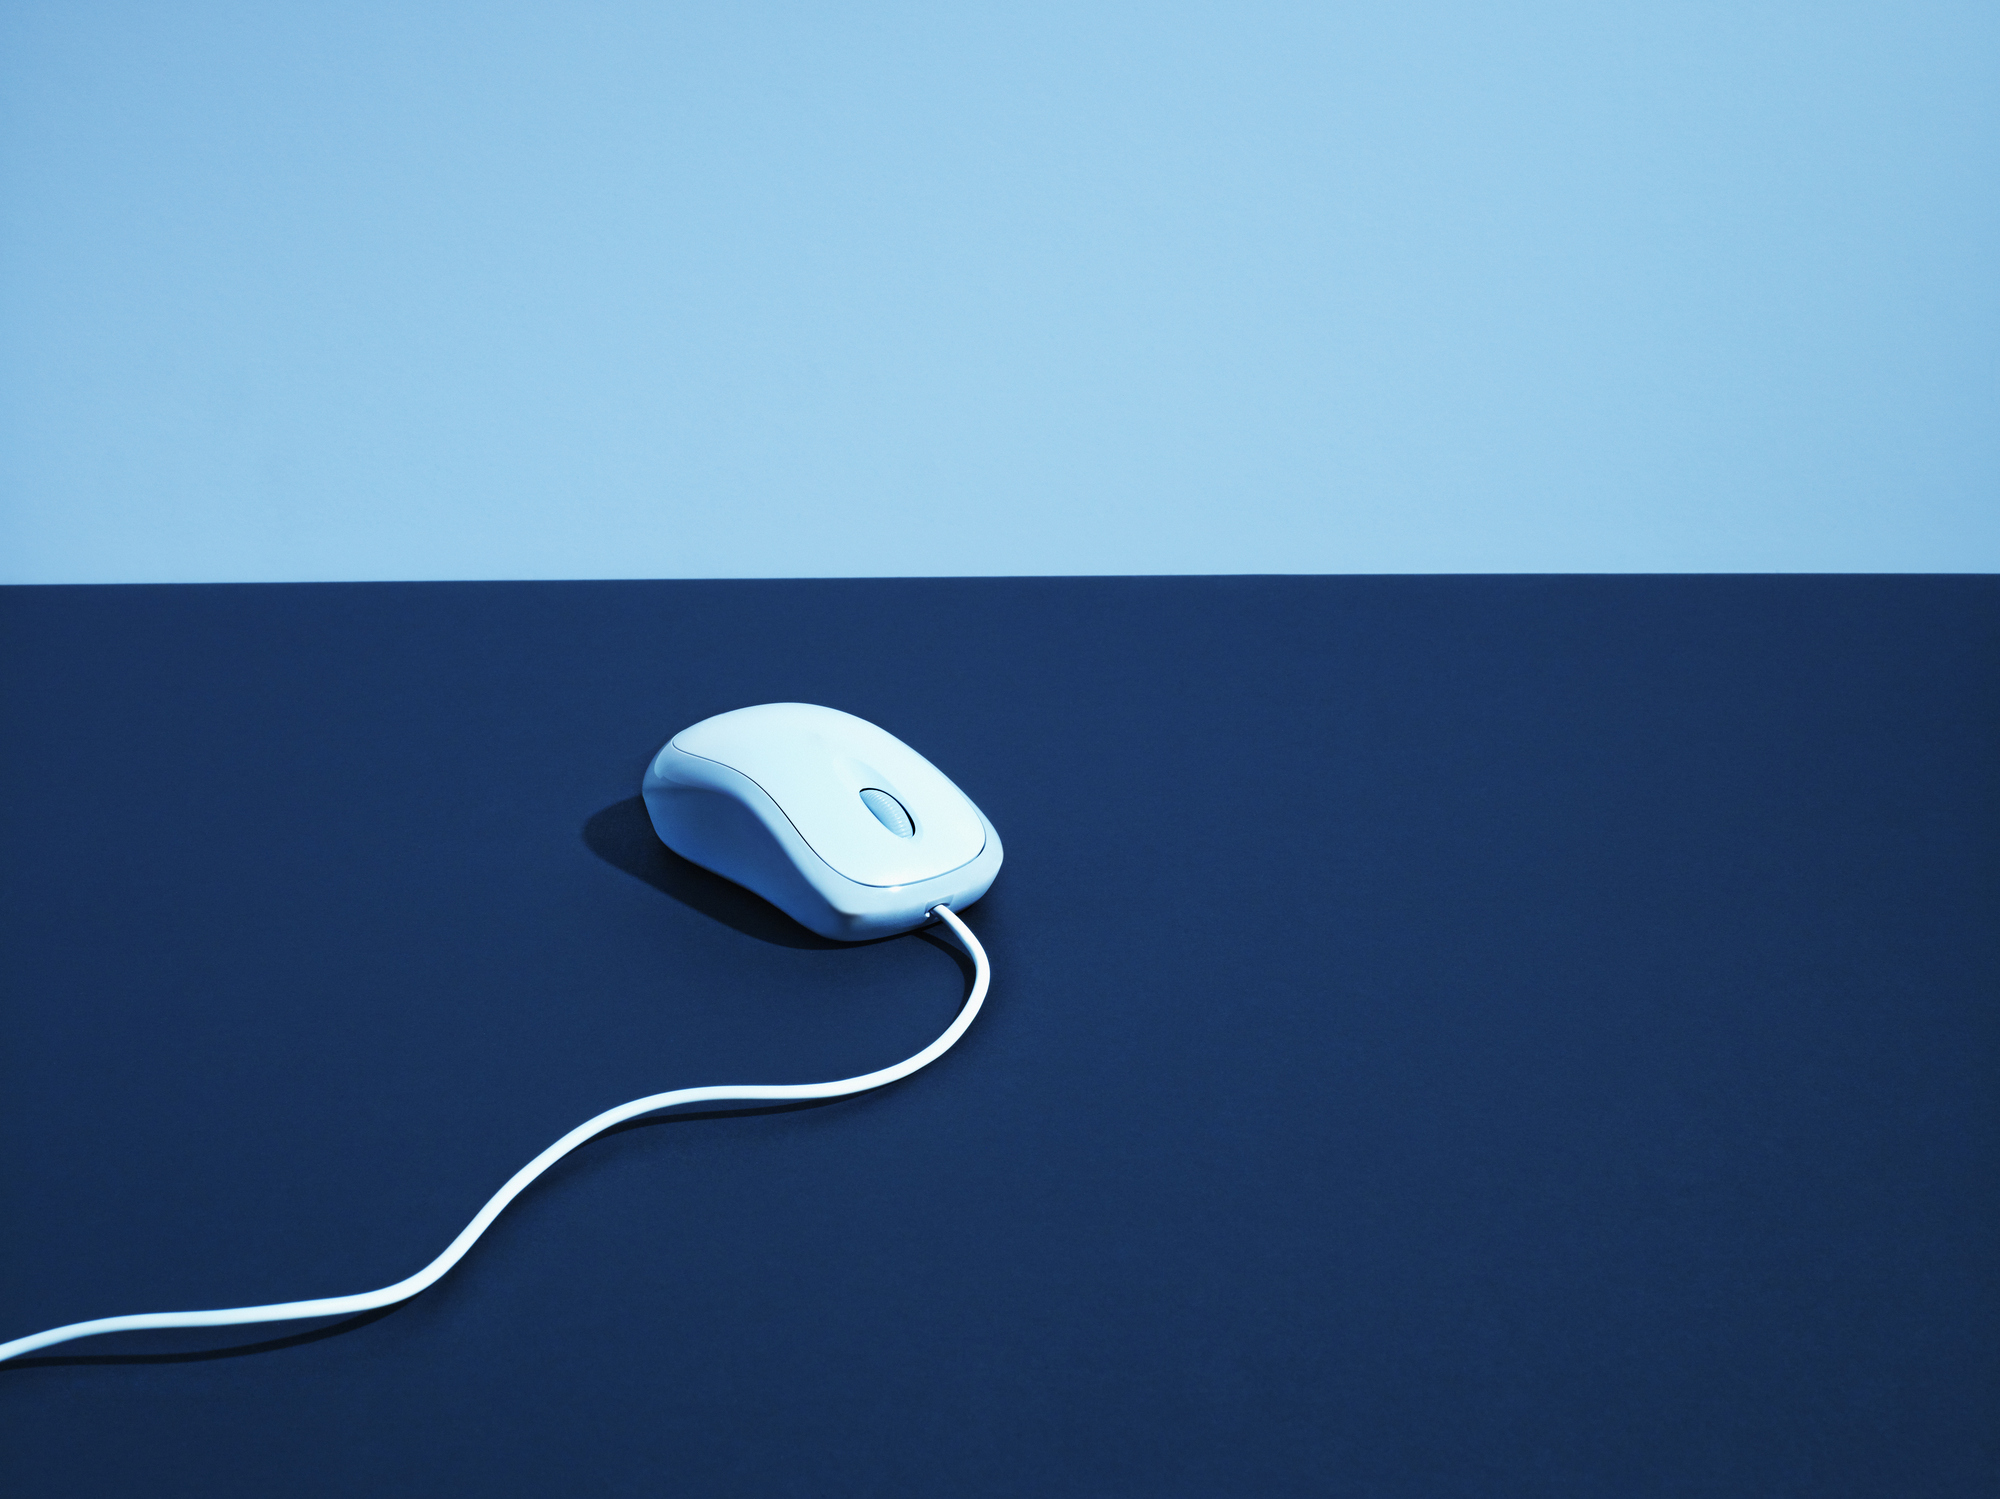 Computer mouse with cord